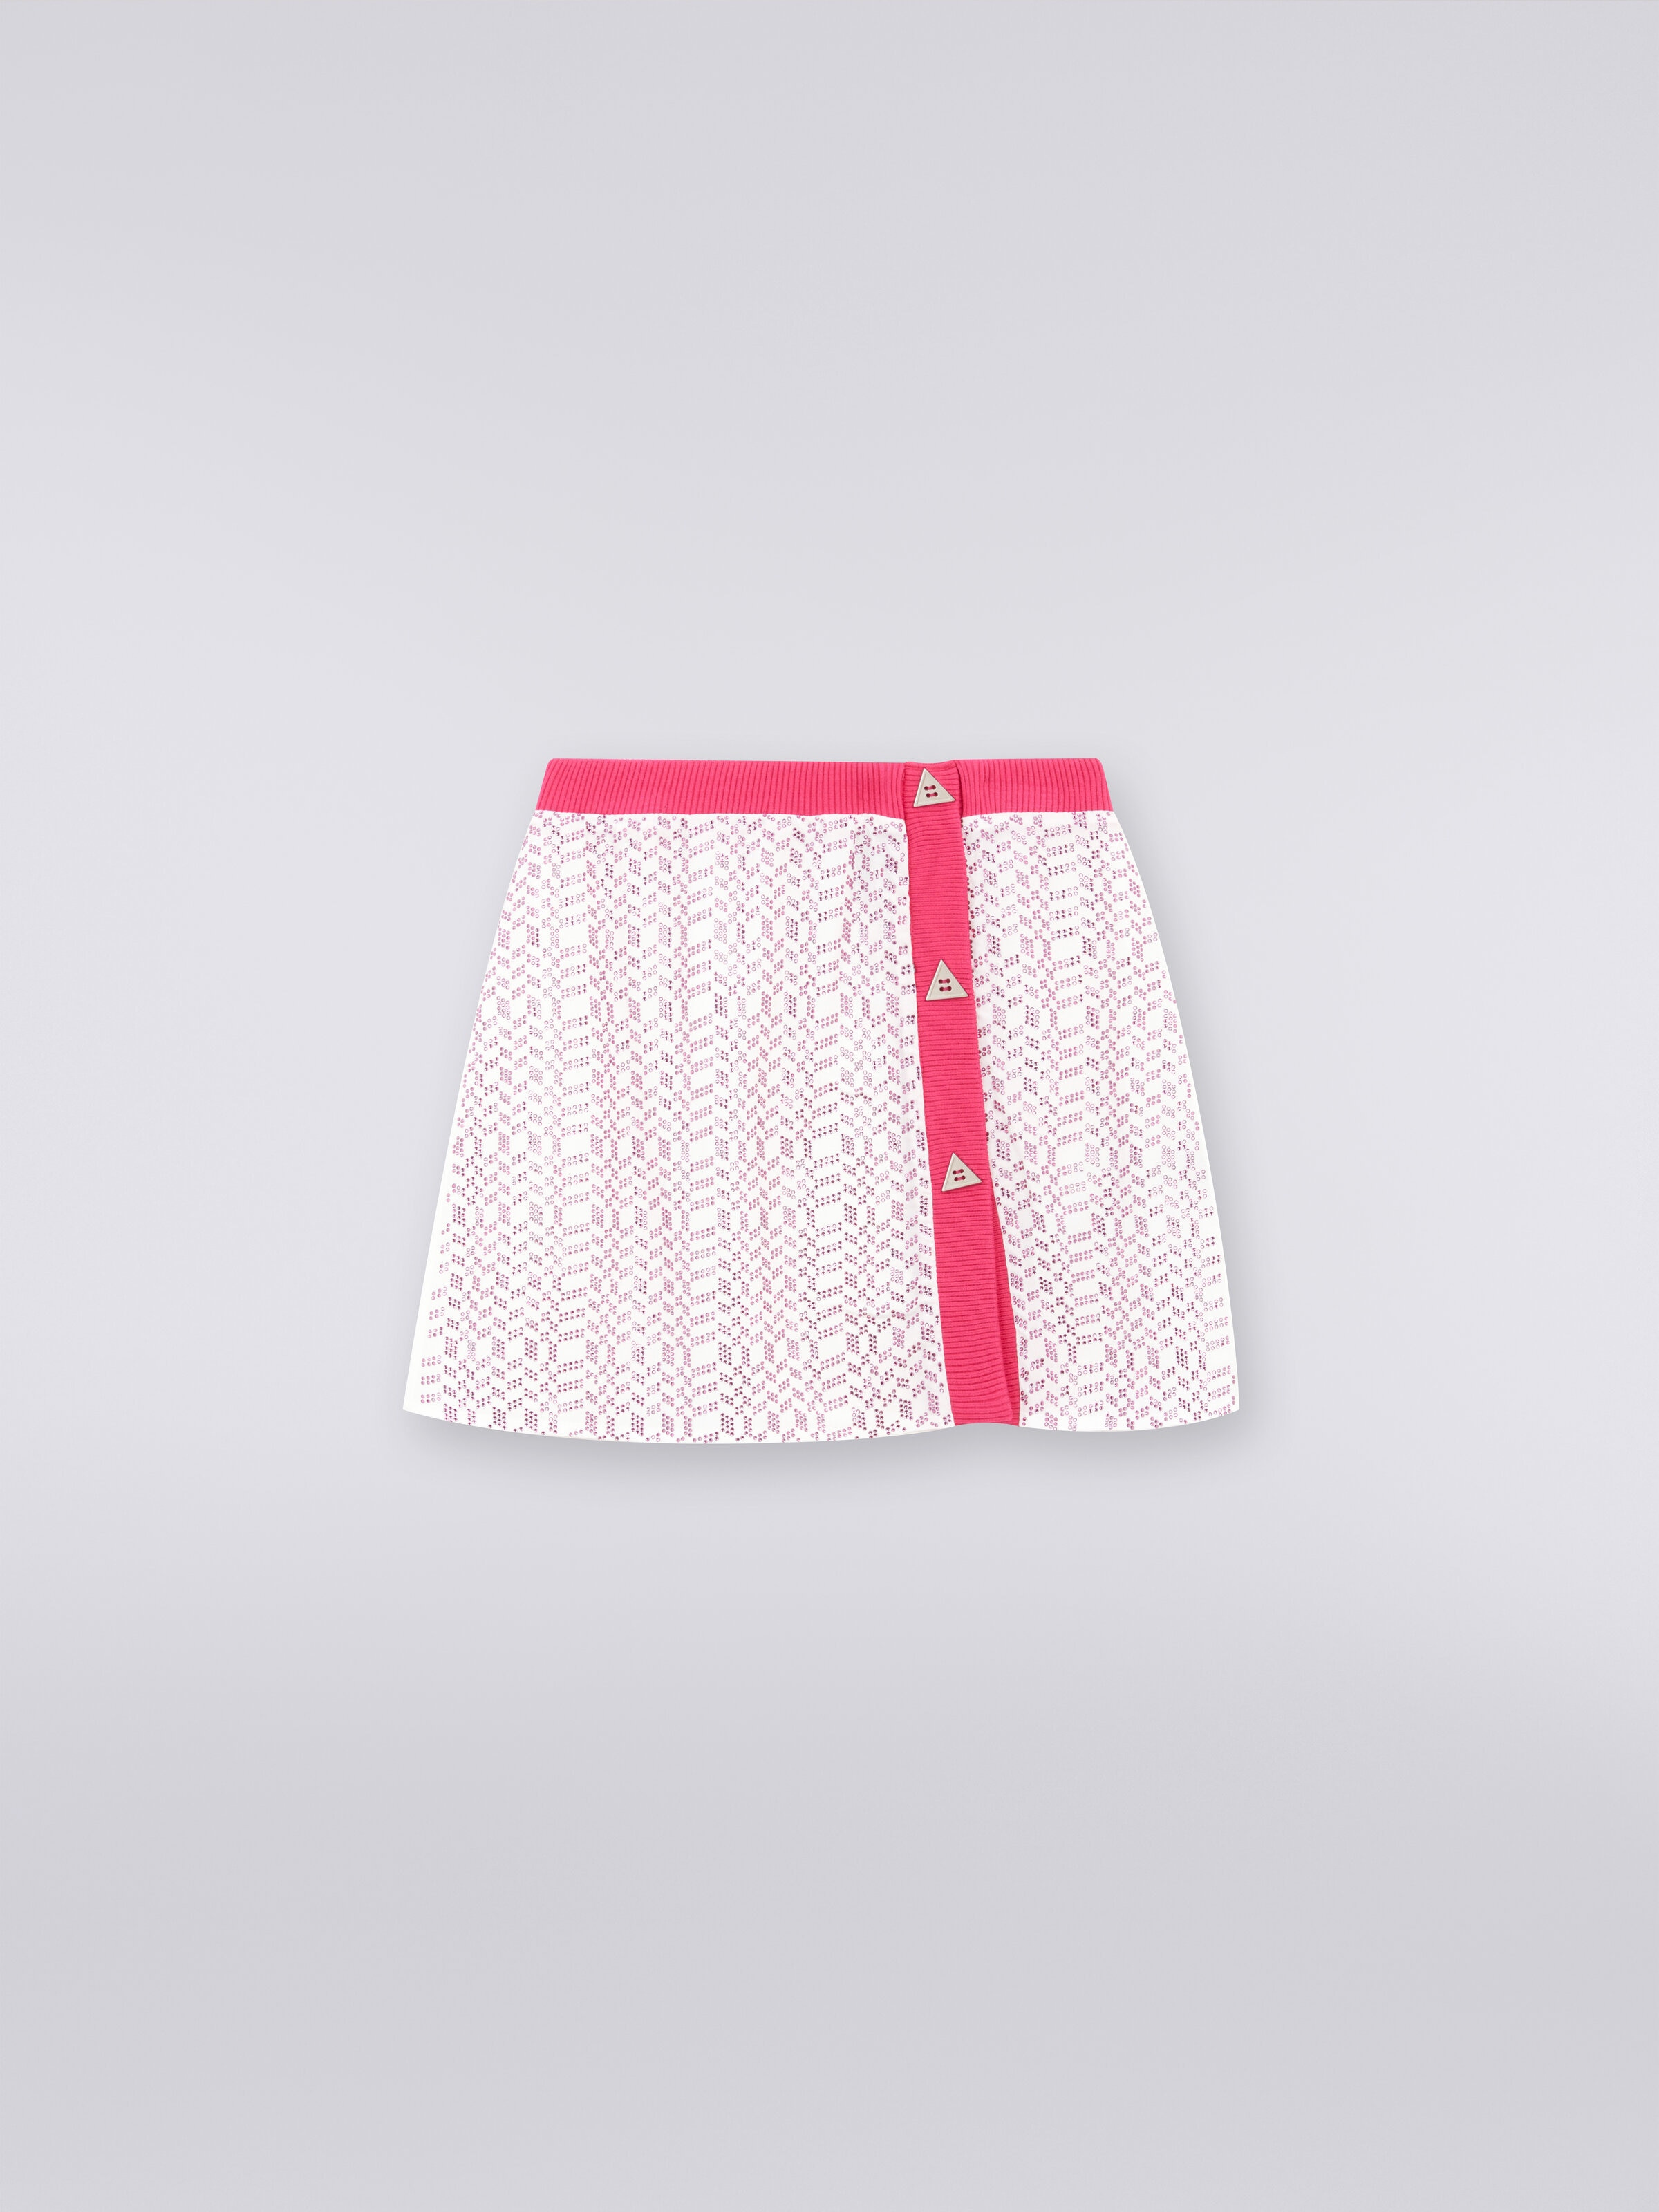 Silk and technical fabric skirt, Pink   - 0